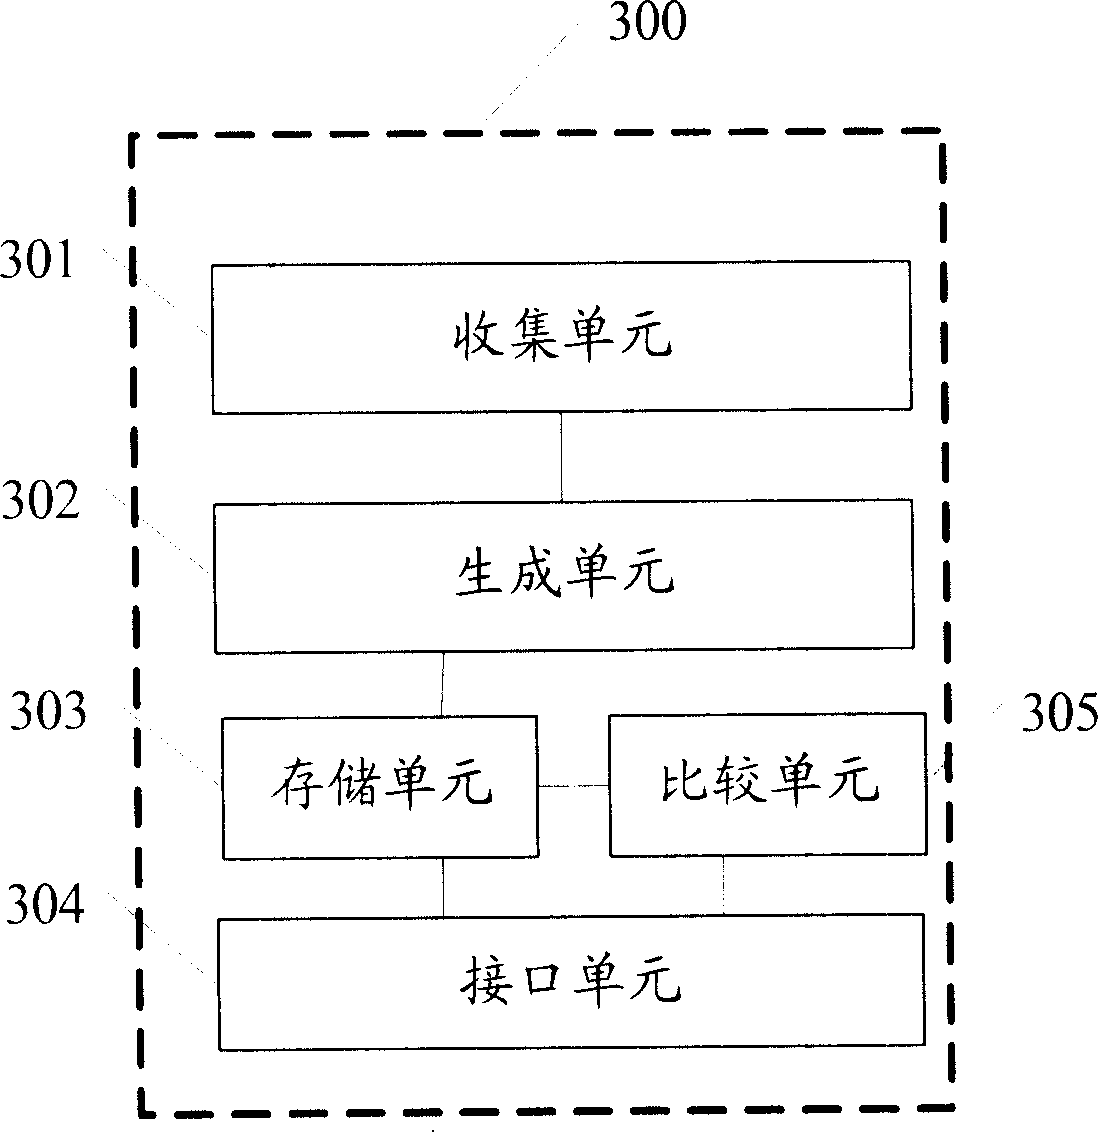 Method and device for validating information